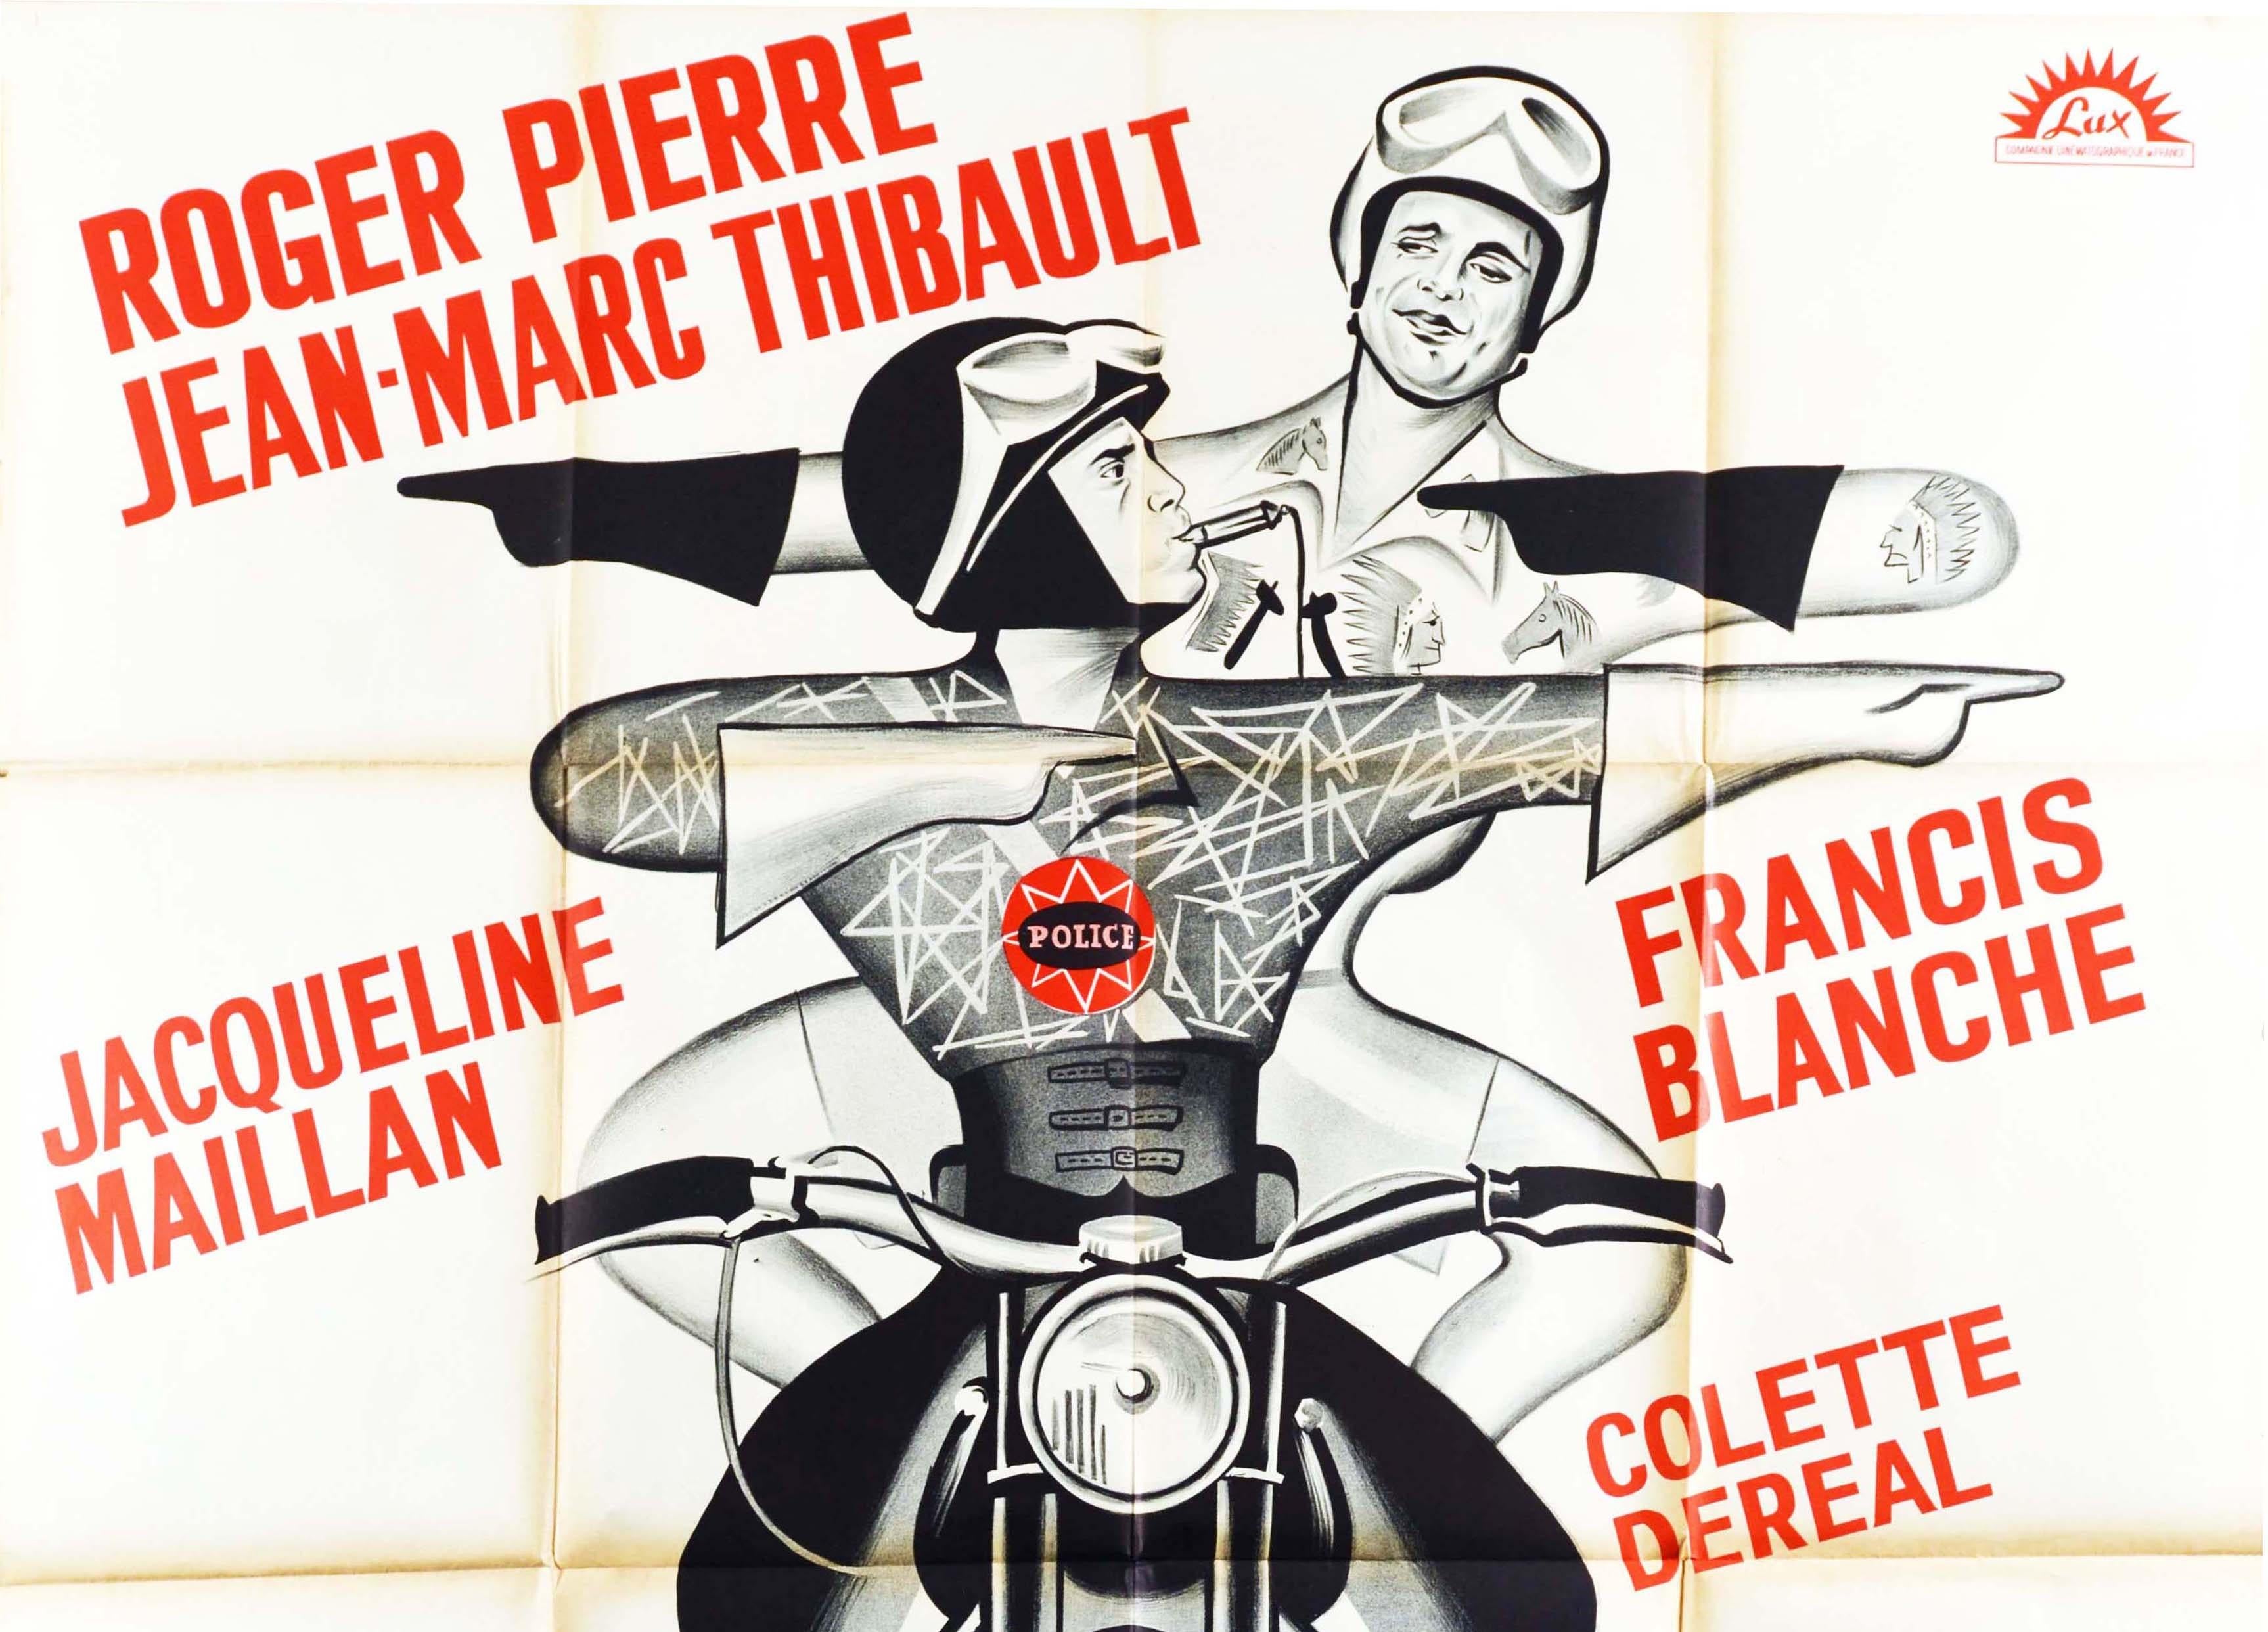 Original Vintage Movie Poster Les Motards The Motorcycle Cops French Comedy Film - Print by Gallard